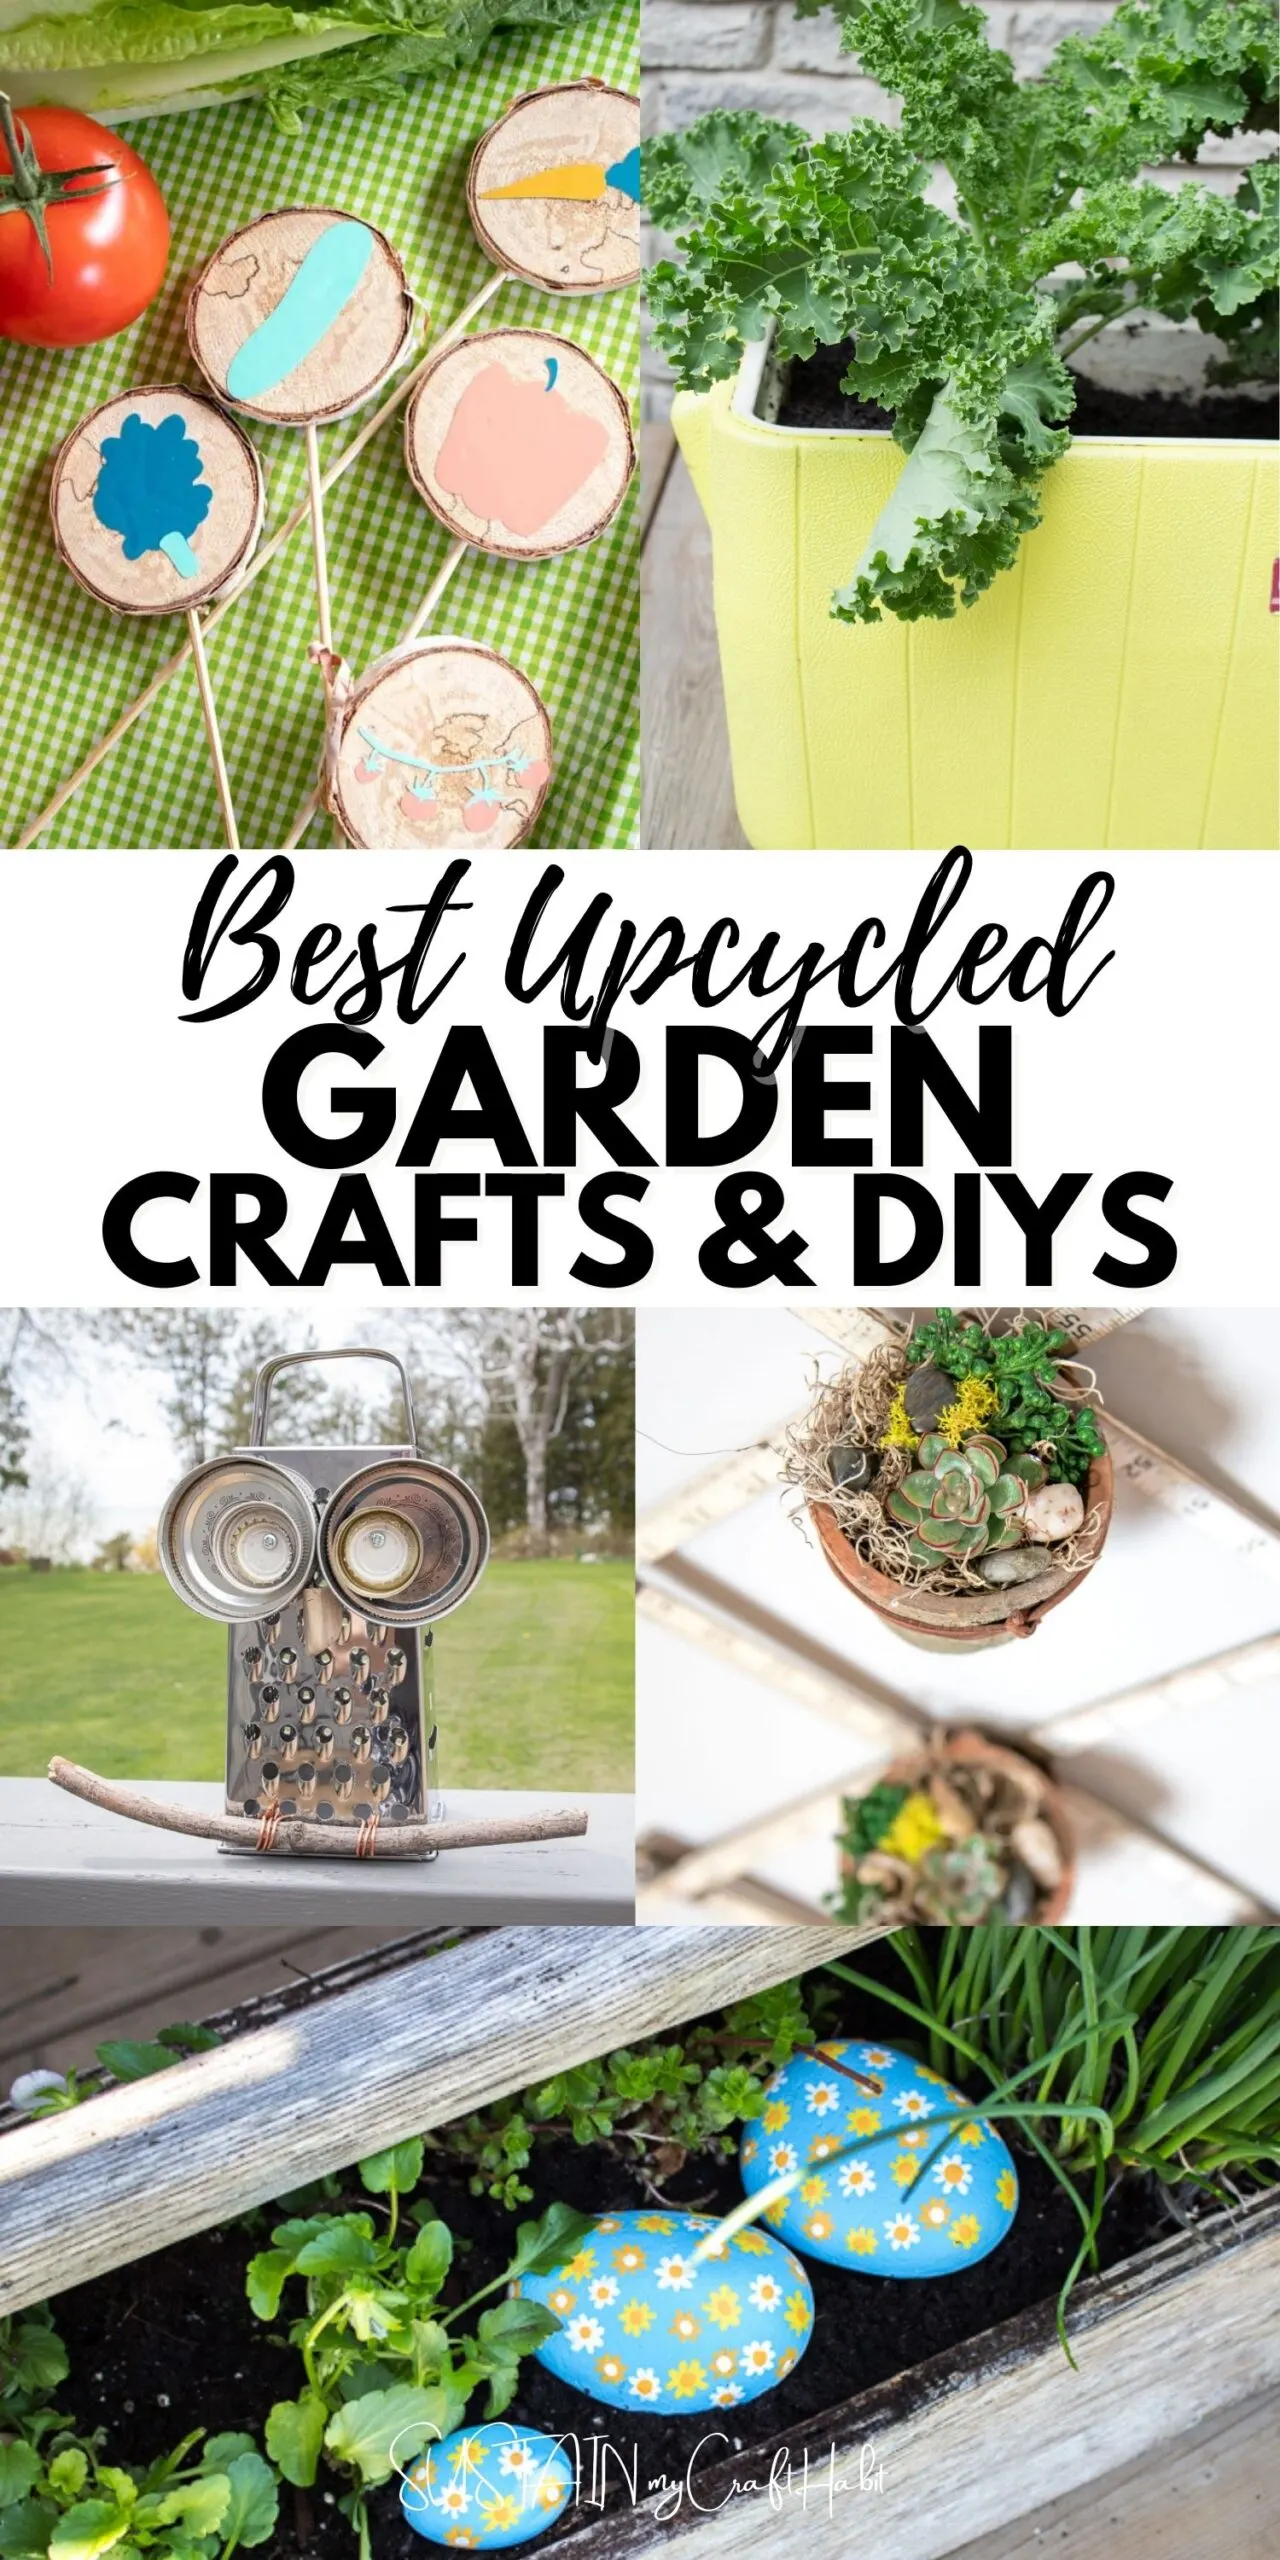 Collage of images as examples of upcycling ideas for the garden including planters, decor and crafts.